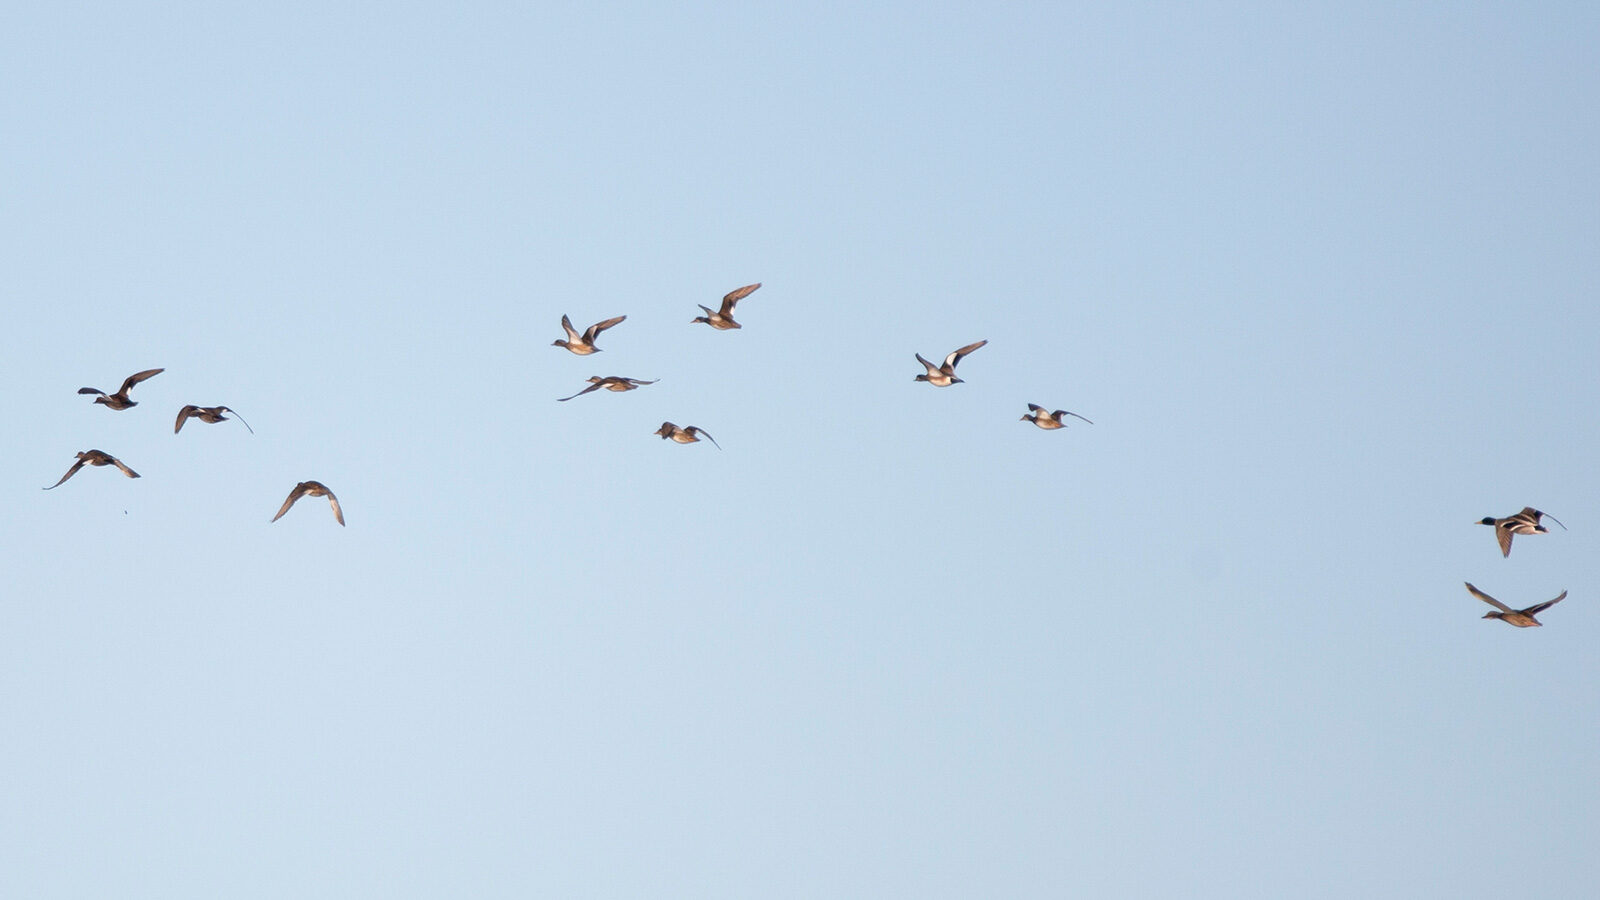 American wigeon, gadwall, and mallard ducks flying in the sky flying in the sky